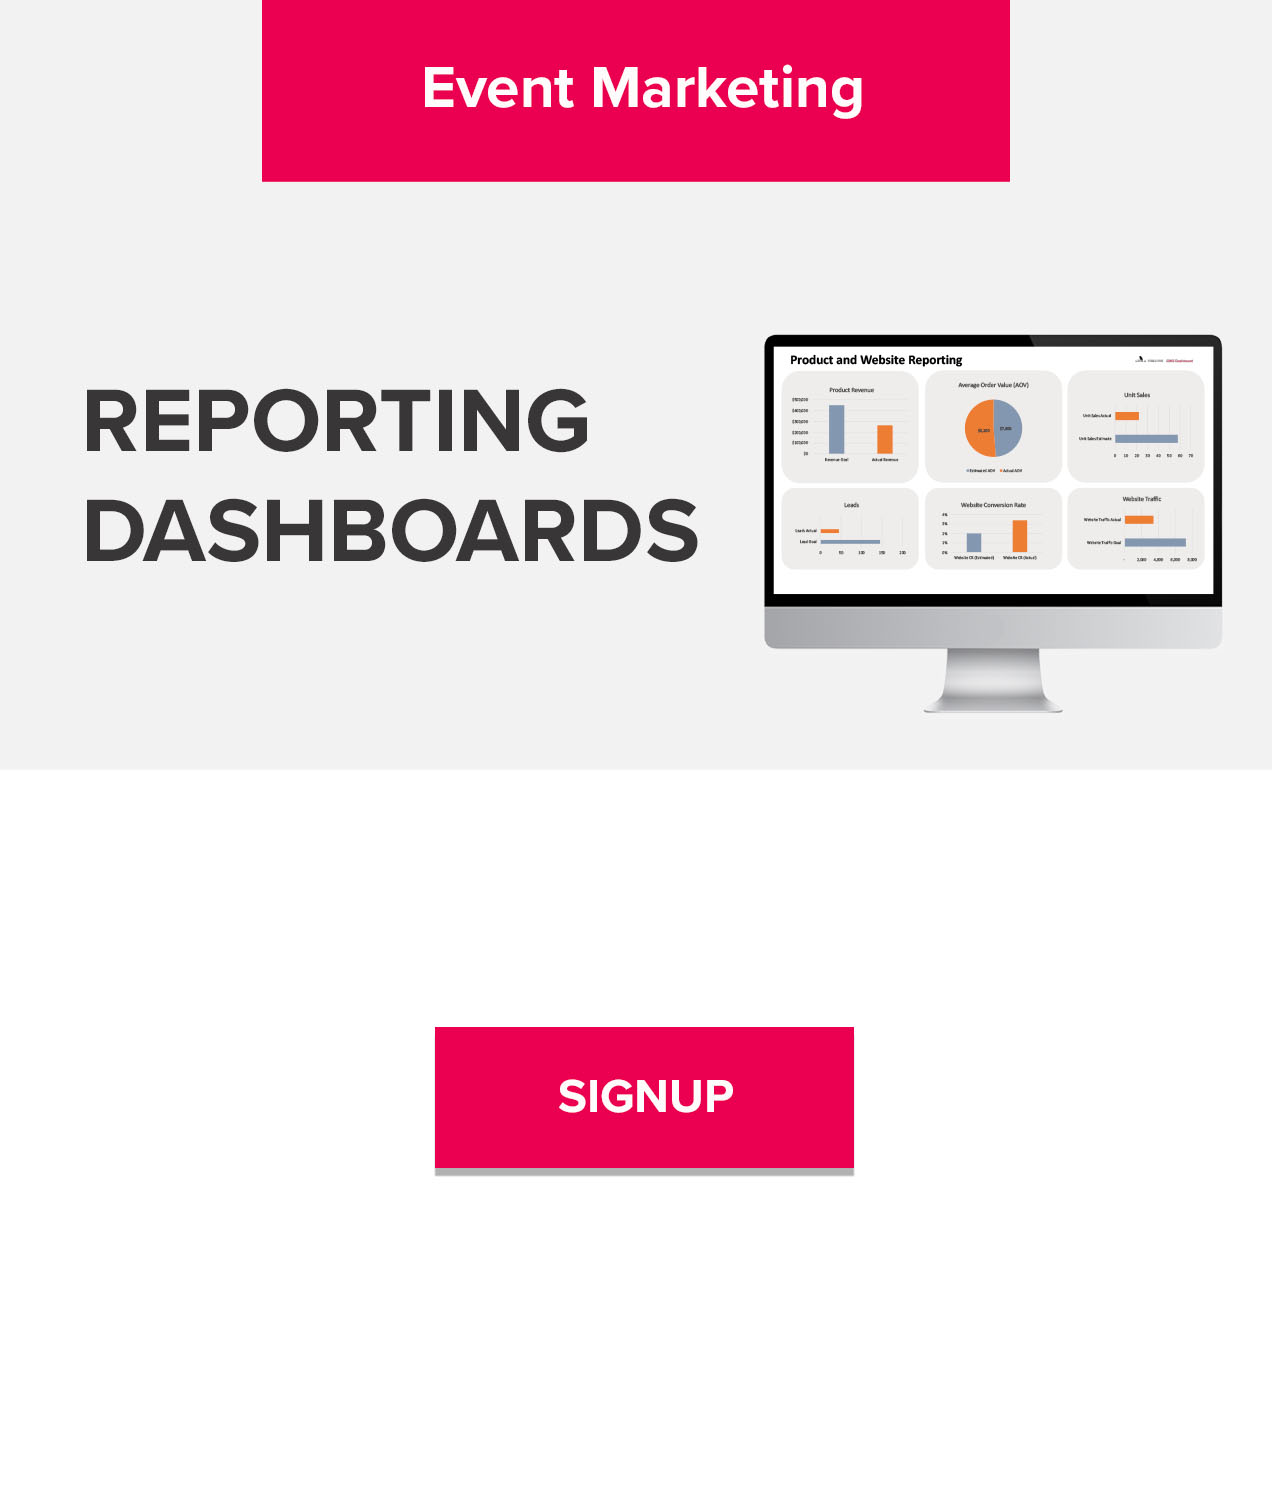 CMO Dashboard Event Marketing Reporting